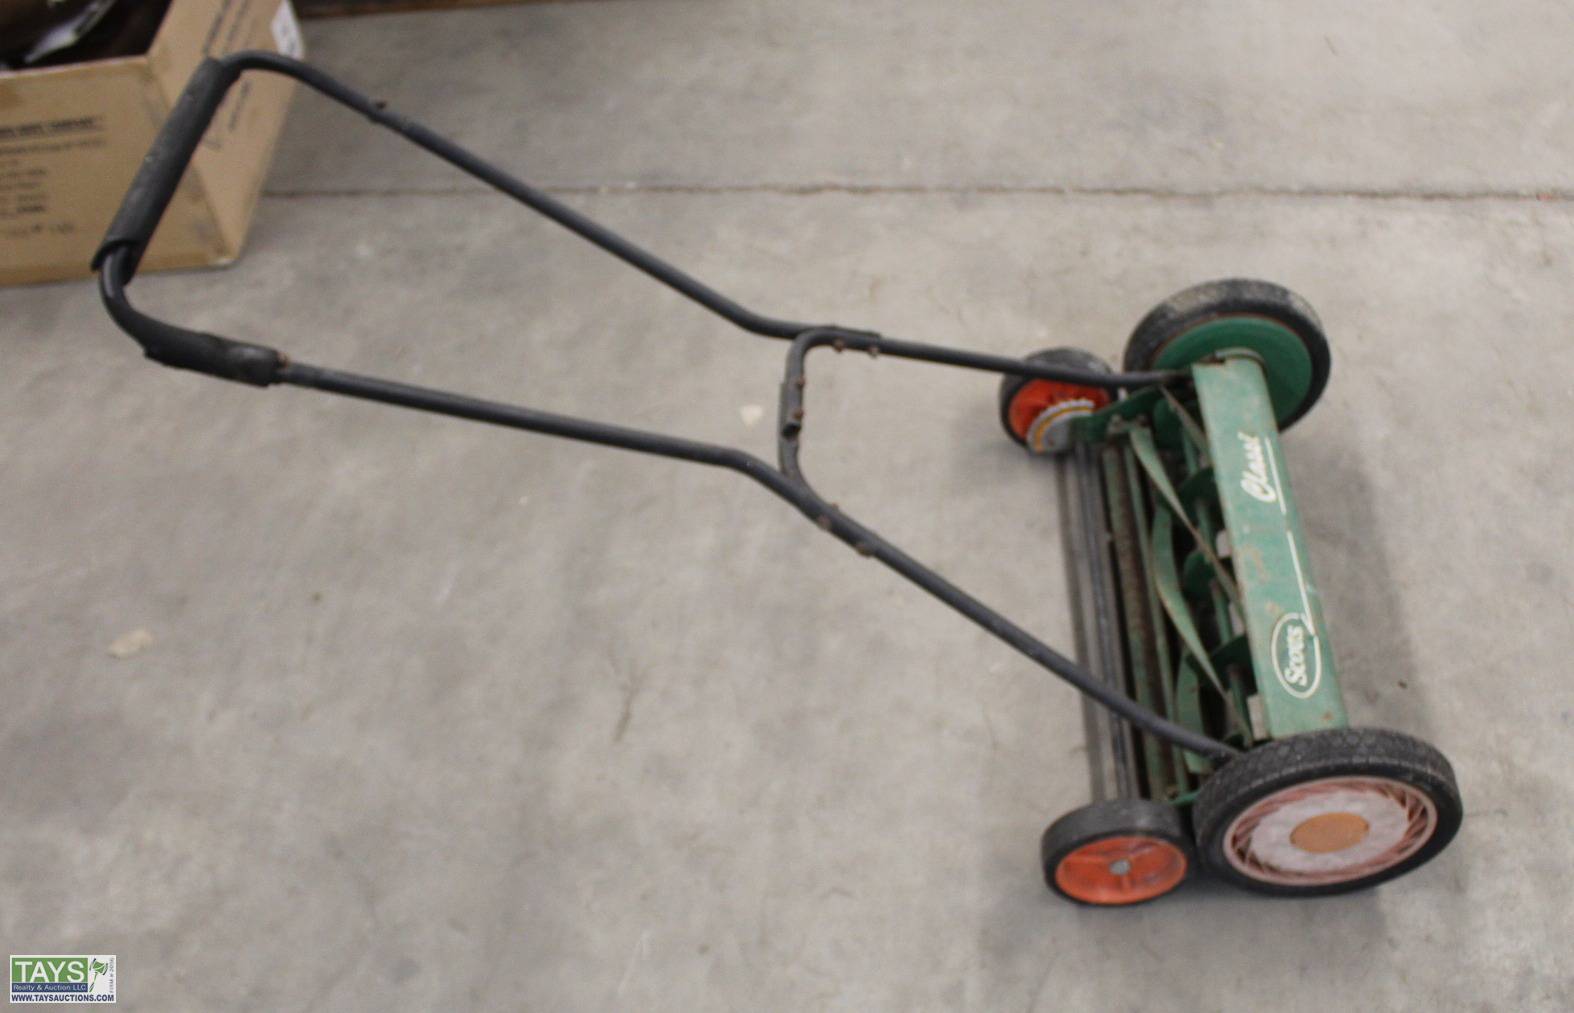 Tays Realty & Auction - Auction: ONLINE ABSOLUTE AUCTION: VEHICLES - TOOLS  - HAY EQUIPMENT ITEM: Scotts Classic 22 Reel Mower